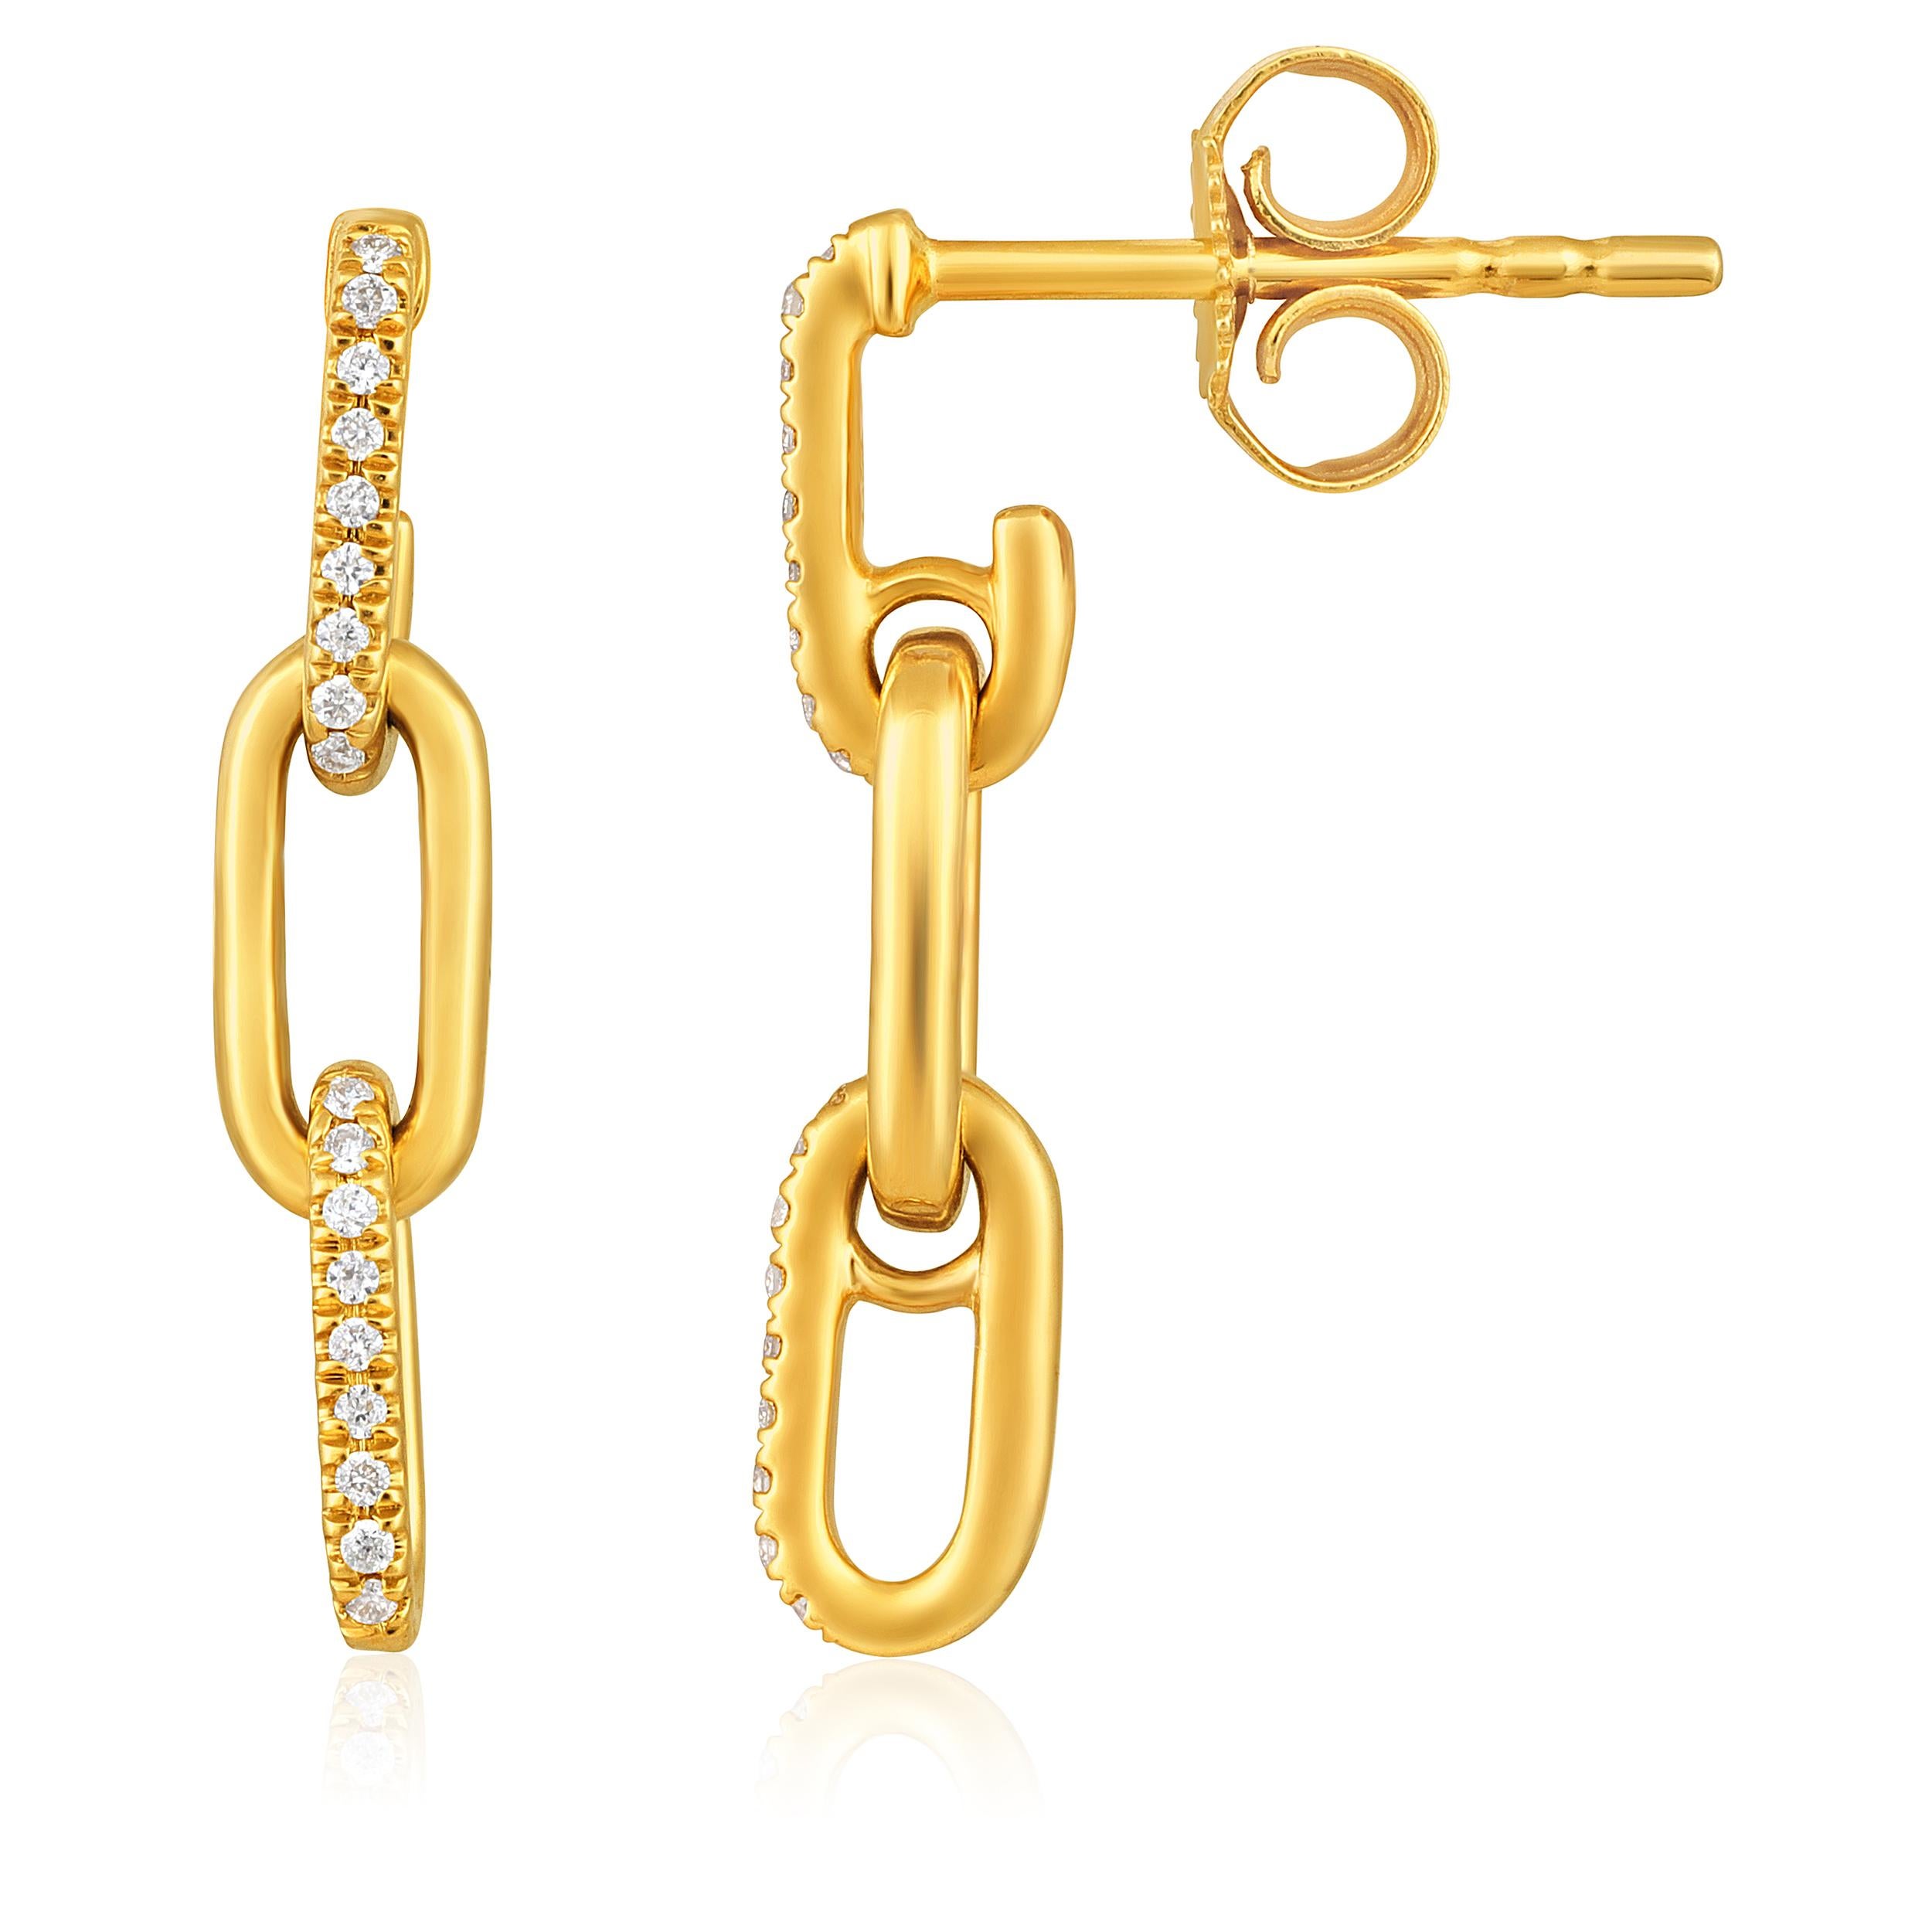 Crafted in 1.65 grams of 14K Yellow Gold, the earrings contain 36 stones of Round Natural Diamonds with a total of 0.07 carat in E-F color and SI clarity.

CONTEMPORARY AND TIMELESS ESSENCE: Crafted in 14-karat/18-karat with 100% natural diamond and